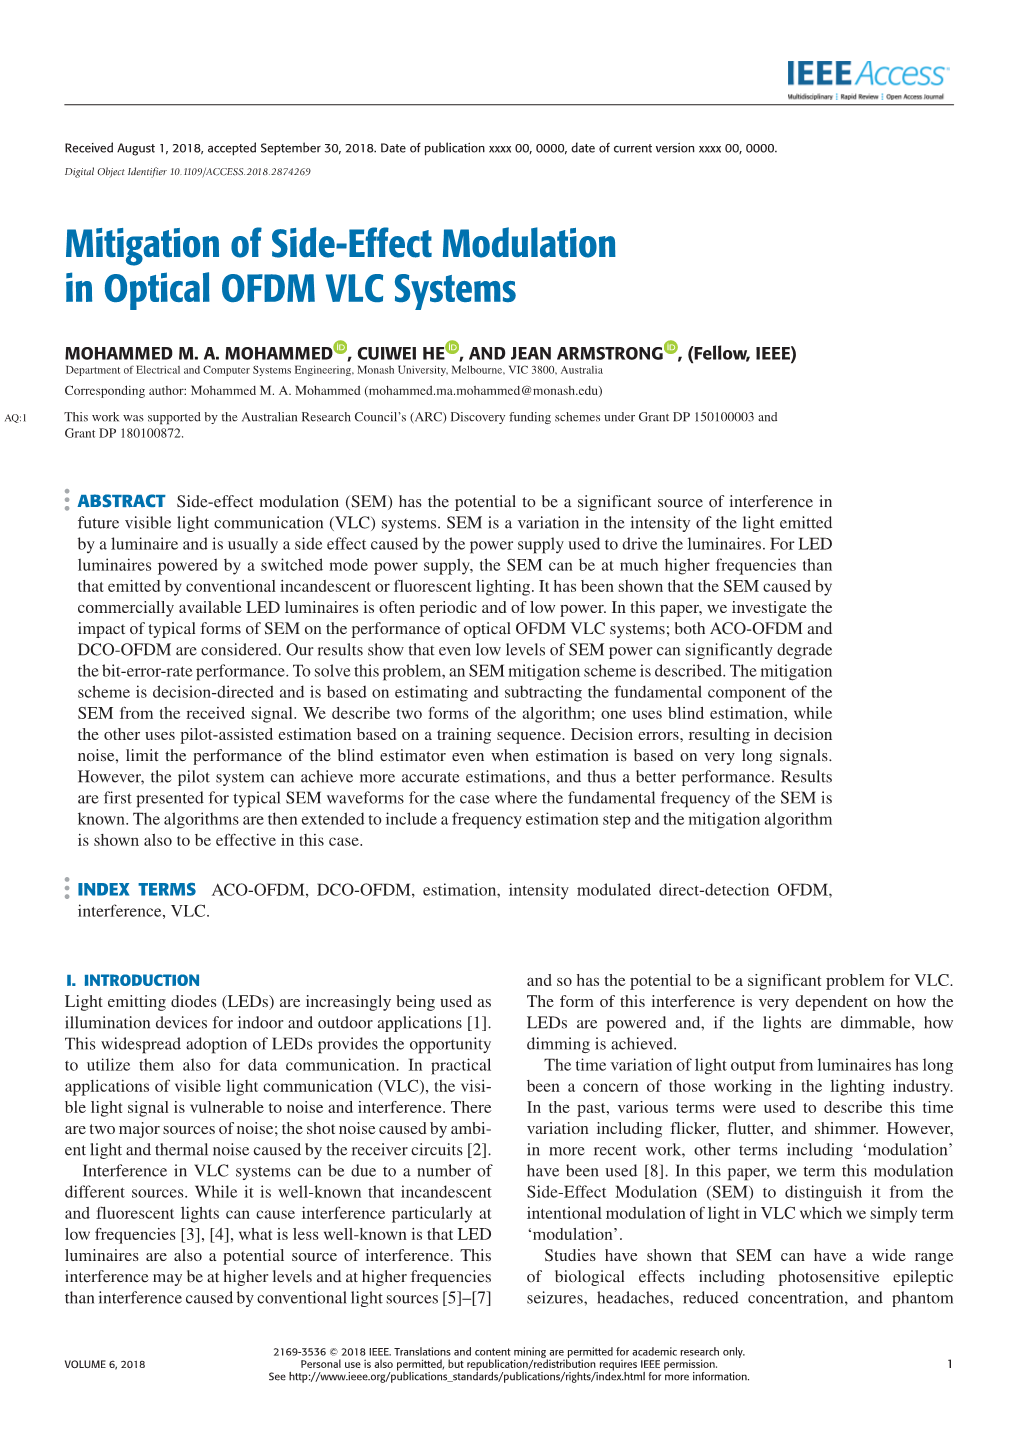 Mitigation of Side-Effect Modulation in Optical OFDM VLC Systems